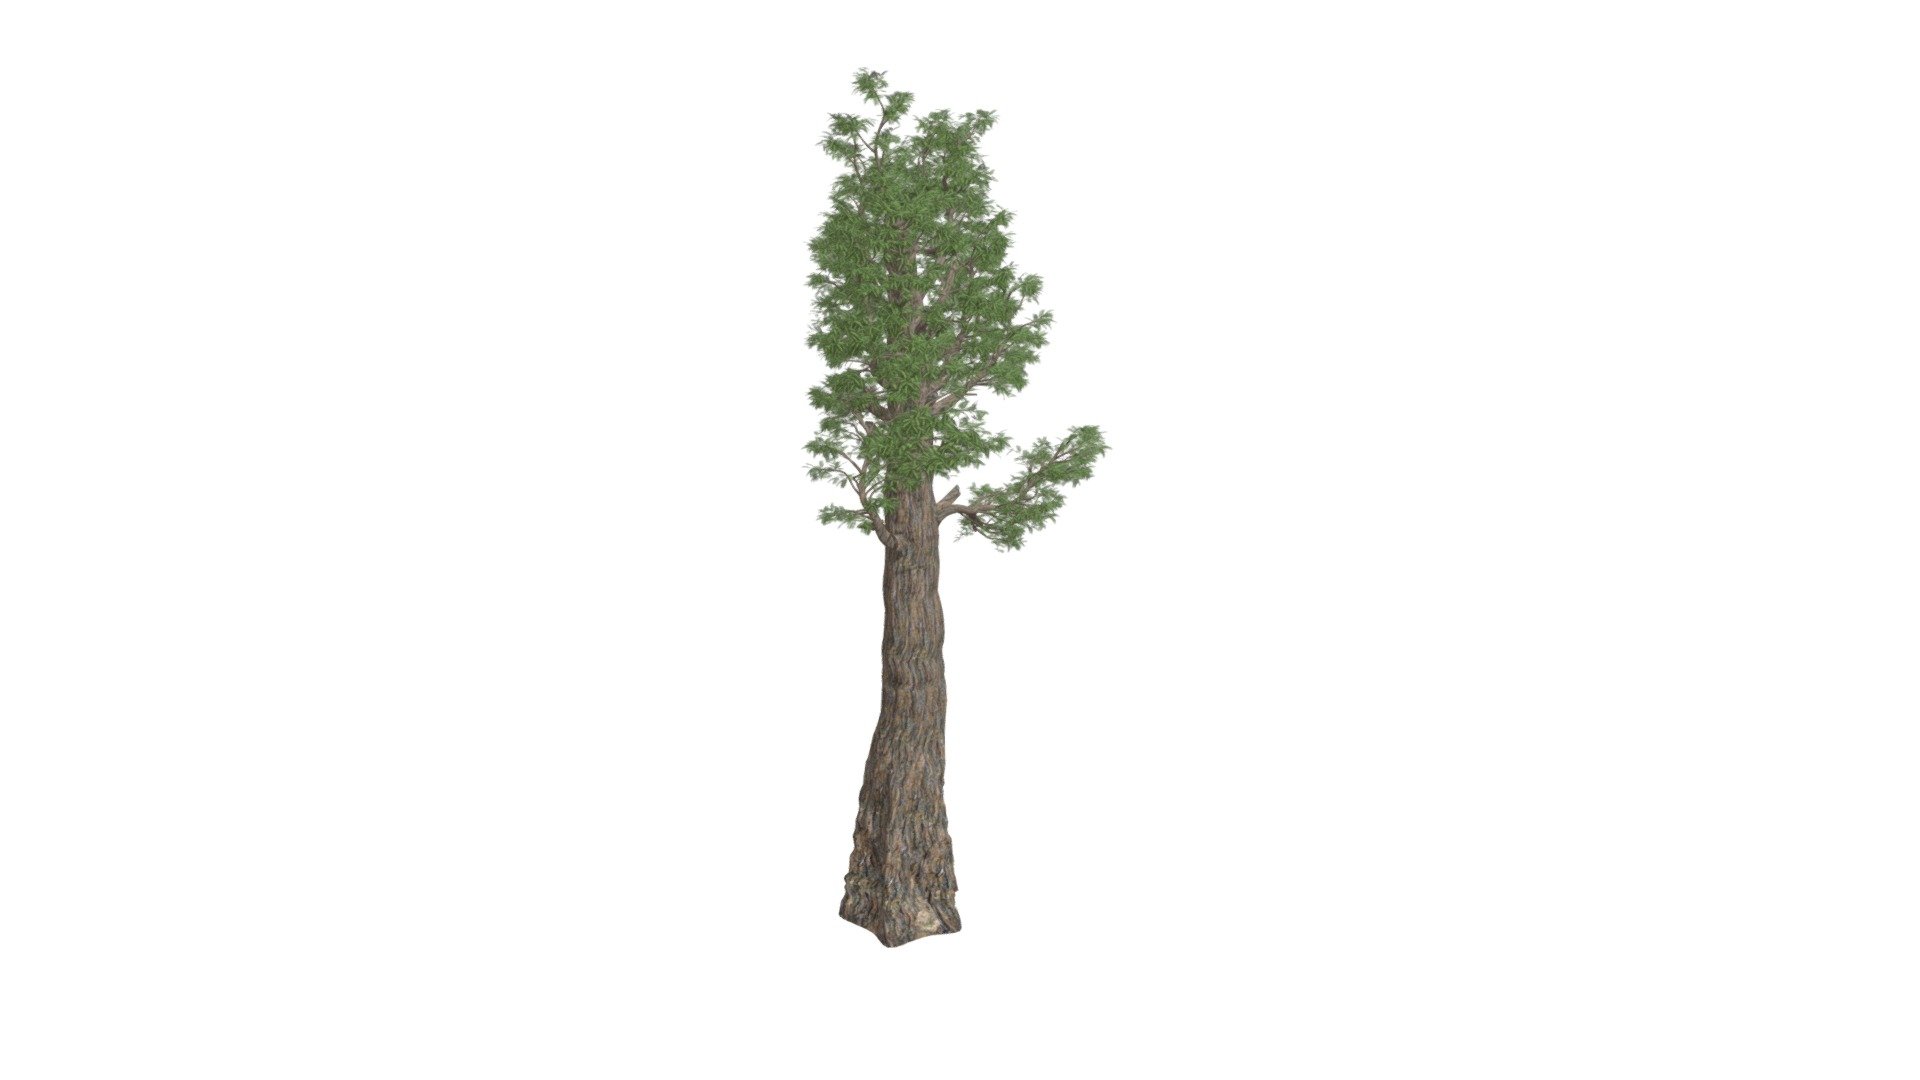 This 3D model of the Giant Redwood (Sequoia) Tree is a highly detailed and photorealistic option suitable for architectural, landscaping, and video game projects. The model is designed with carefully crafted textures that mimic the natural beauty of a real Giant Redwood (Sequoia) Tree. Its versatility allows it to bring a touch of realism to any project, whether it's a small architectural rendering or a large-scale landscape design. Additionally, the model is optimized for performance and features efficient UV mapping. This photorealistic 3D model is the perfect solution for architects, landscapers, and game developers who want to enhance the visual experience of their project with a highly detailed, photorealistic Giant Redwood (Sequoia) Tree 3d model